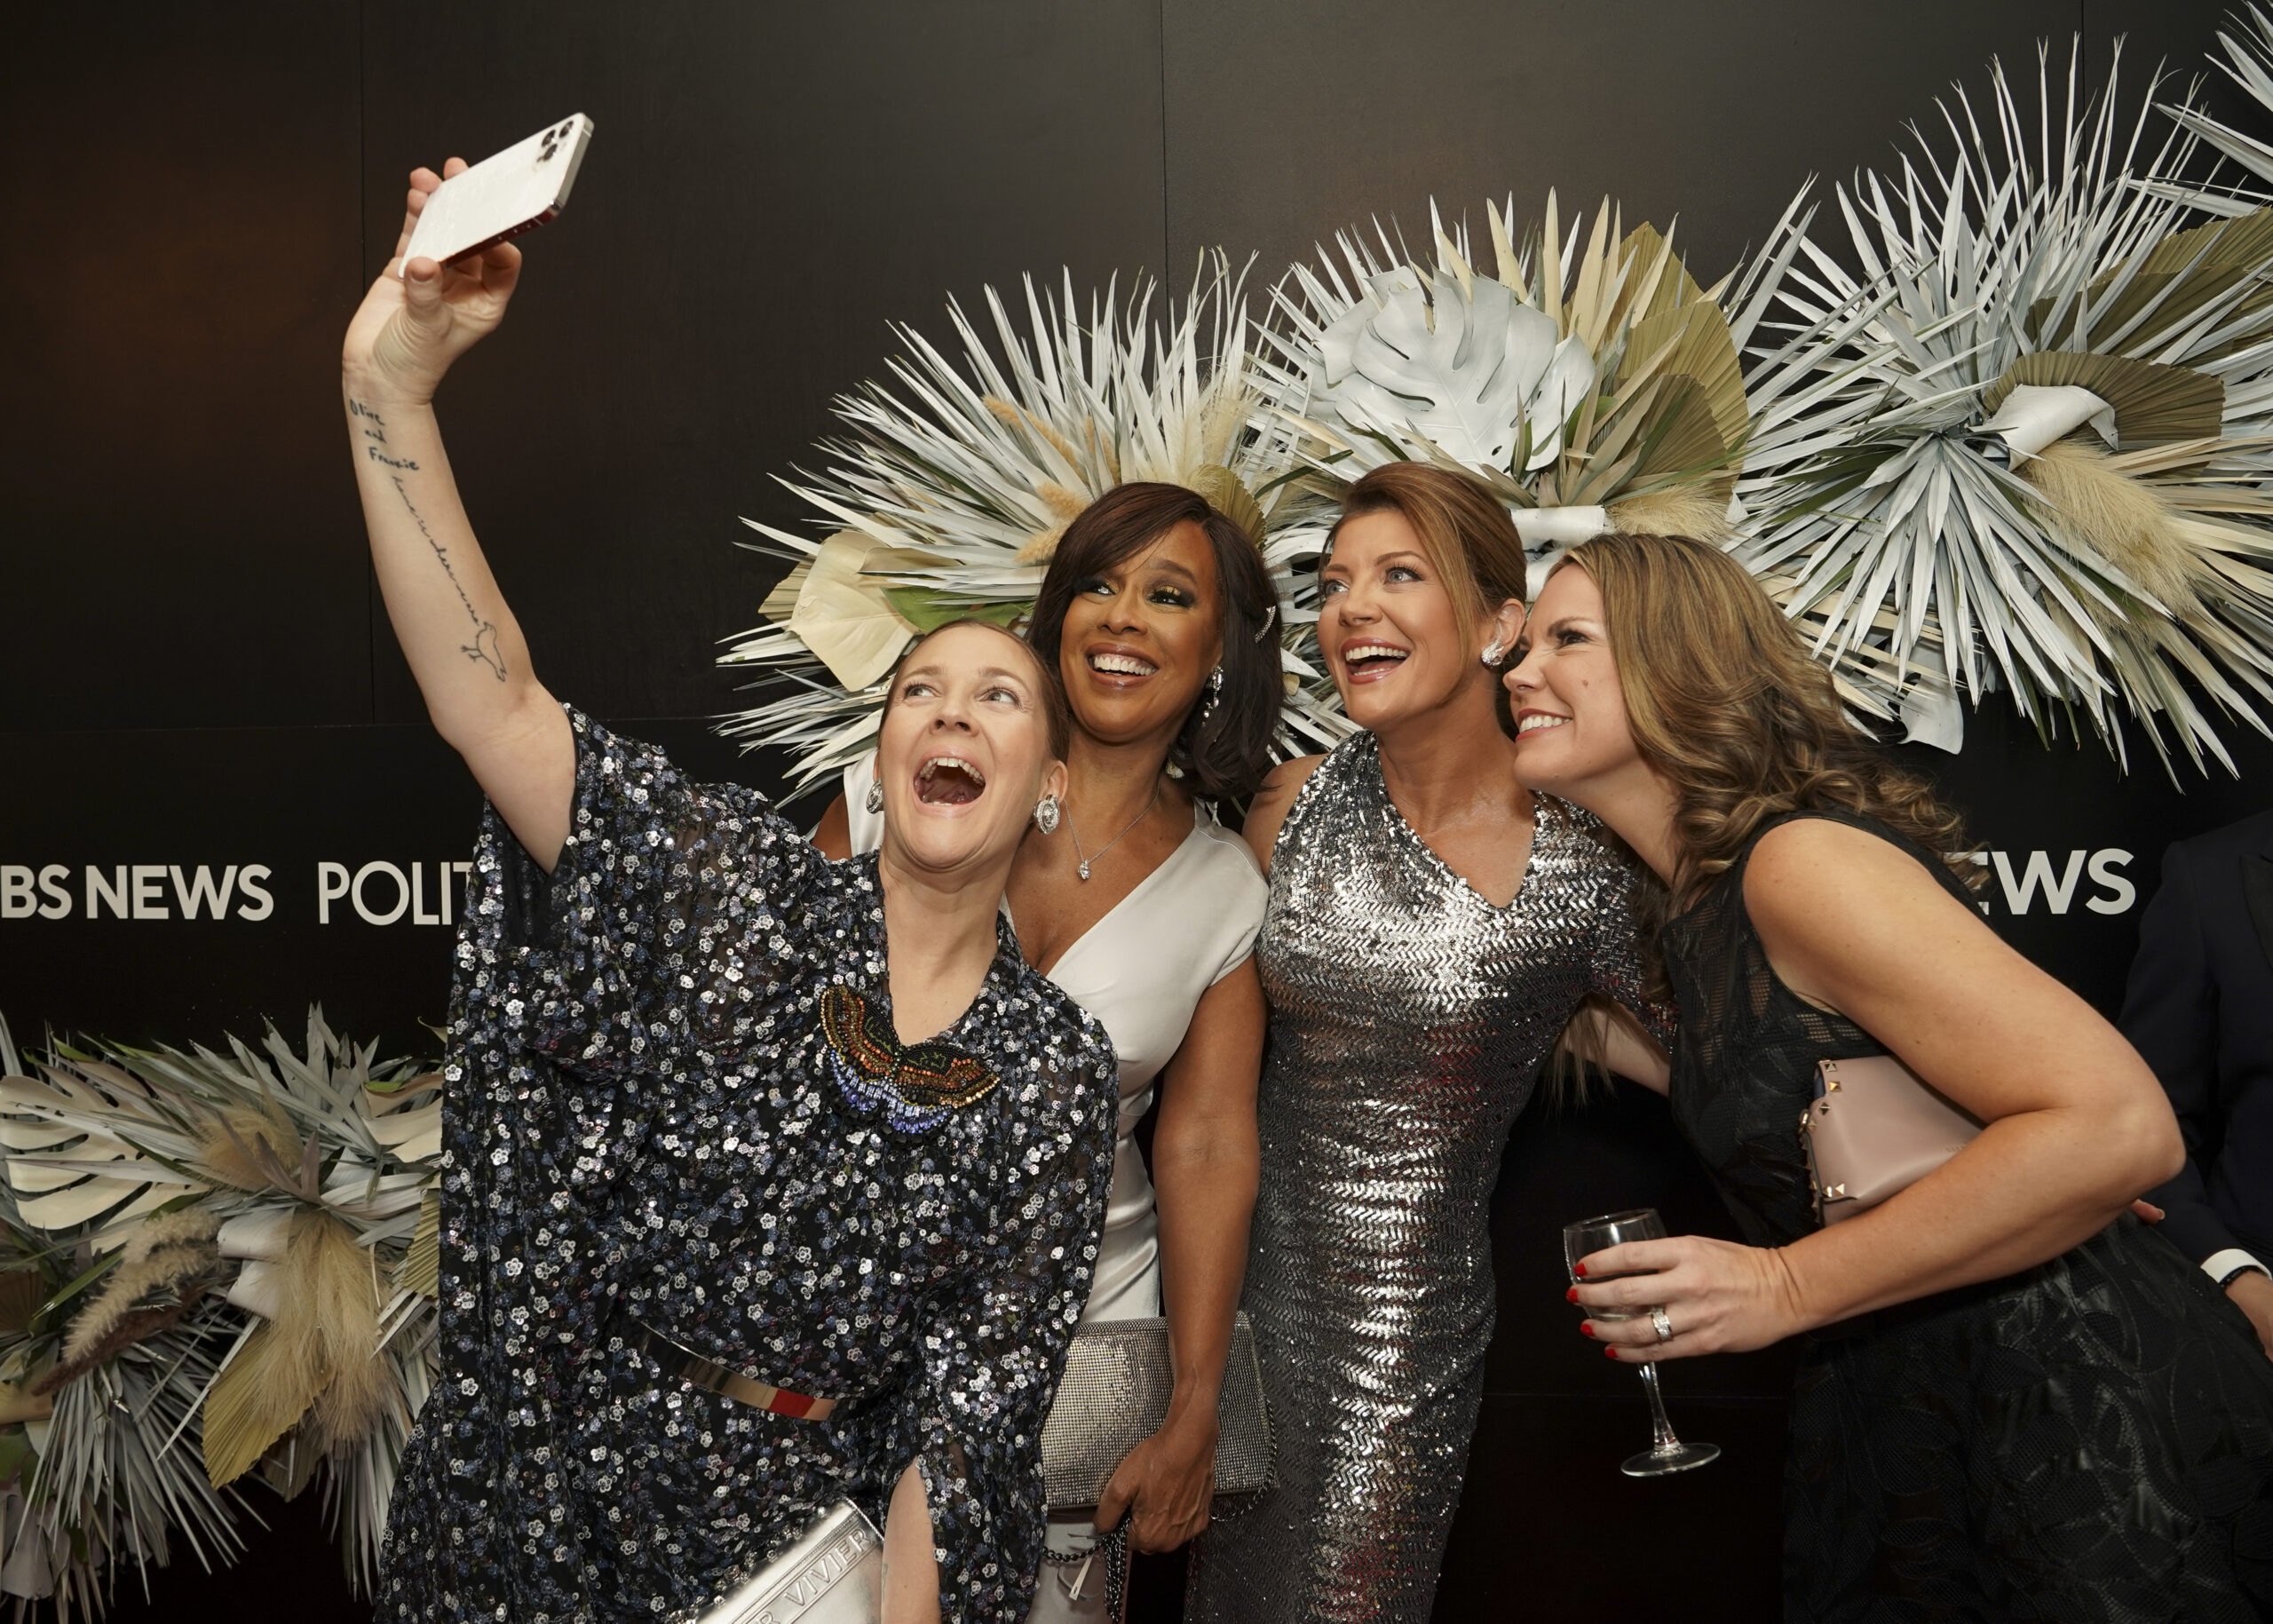 Drew Barrymore, Gayle King, Norah O'Donnell and Wendy McMahon at the CBS News/POLITICO reception ahead of the White House Correspondents' Association dinner at the Washington Hilton, in Washington, D.C., on April 30, 2022. Photo credit: Mary Kouw/CBS.